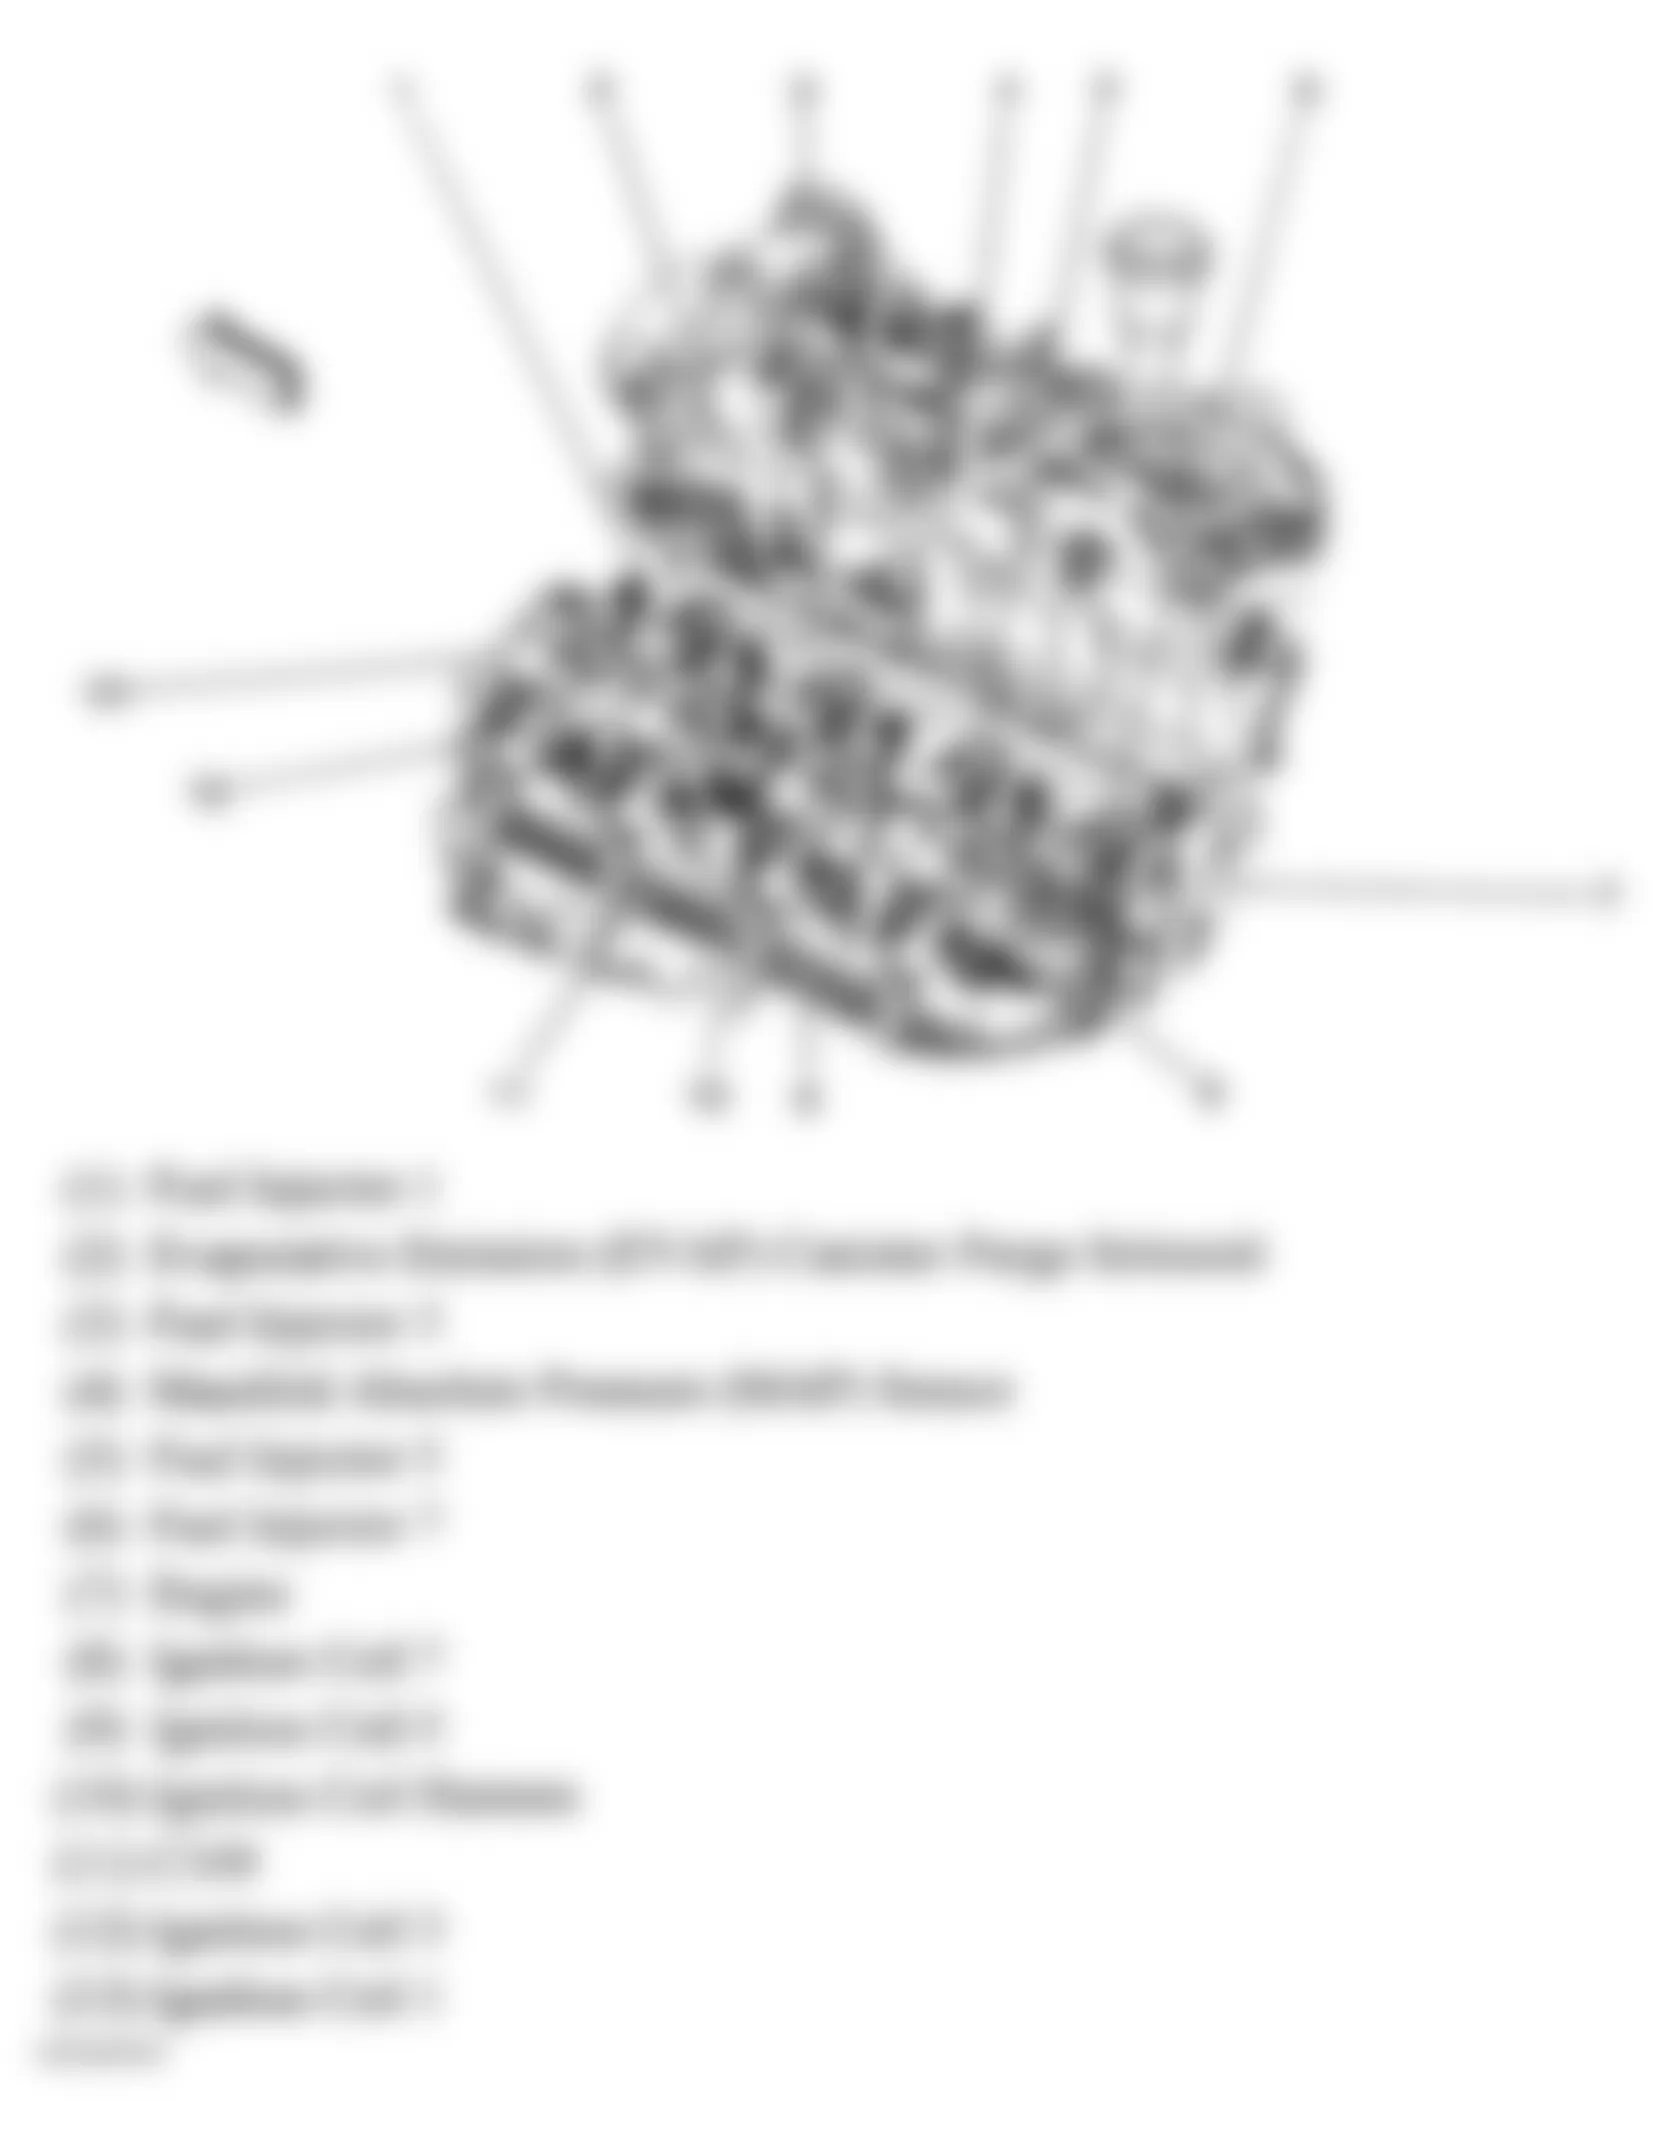 GMC Envoy 2005 - Component Locations -  Upper Left Side Of Engine (5.3L)